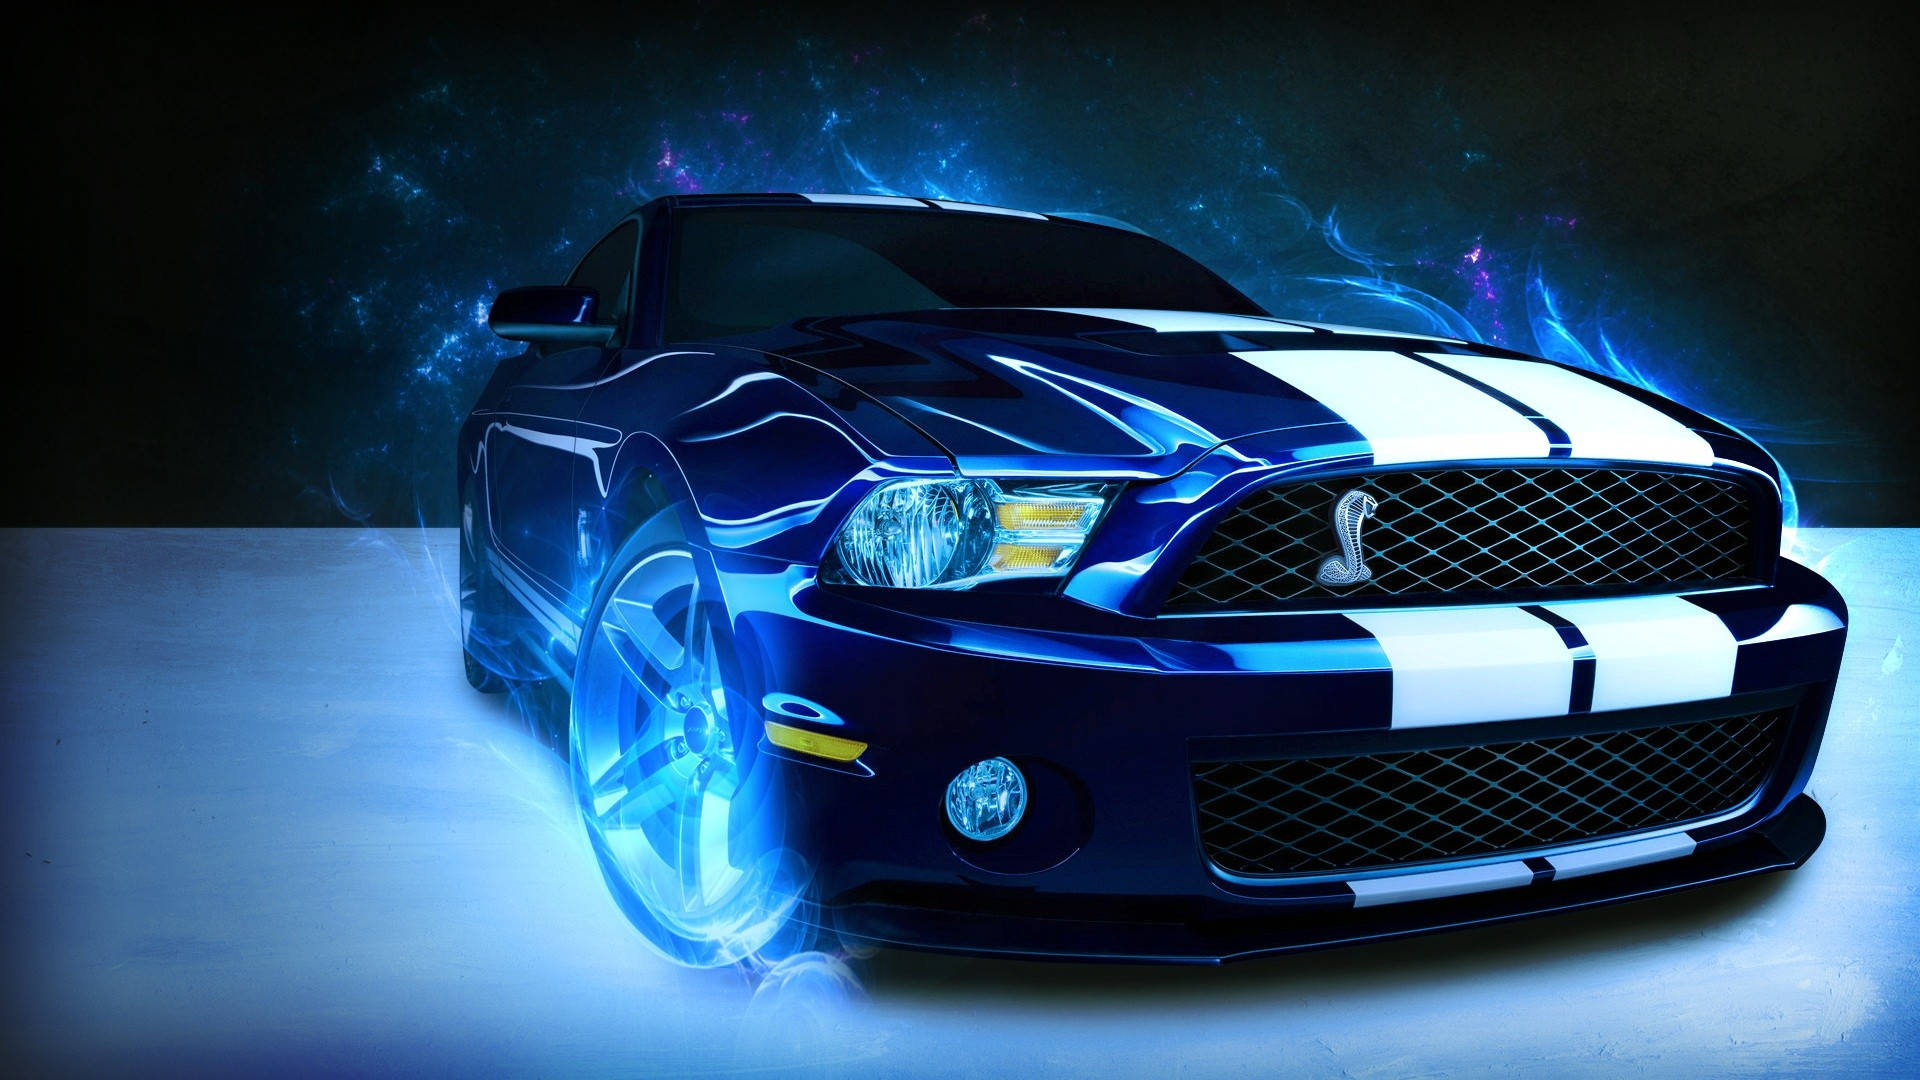 Mustang Hd Blue Flames Background